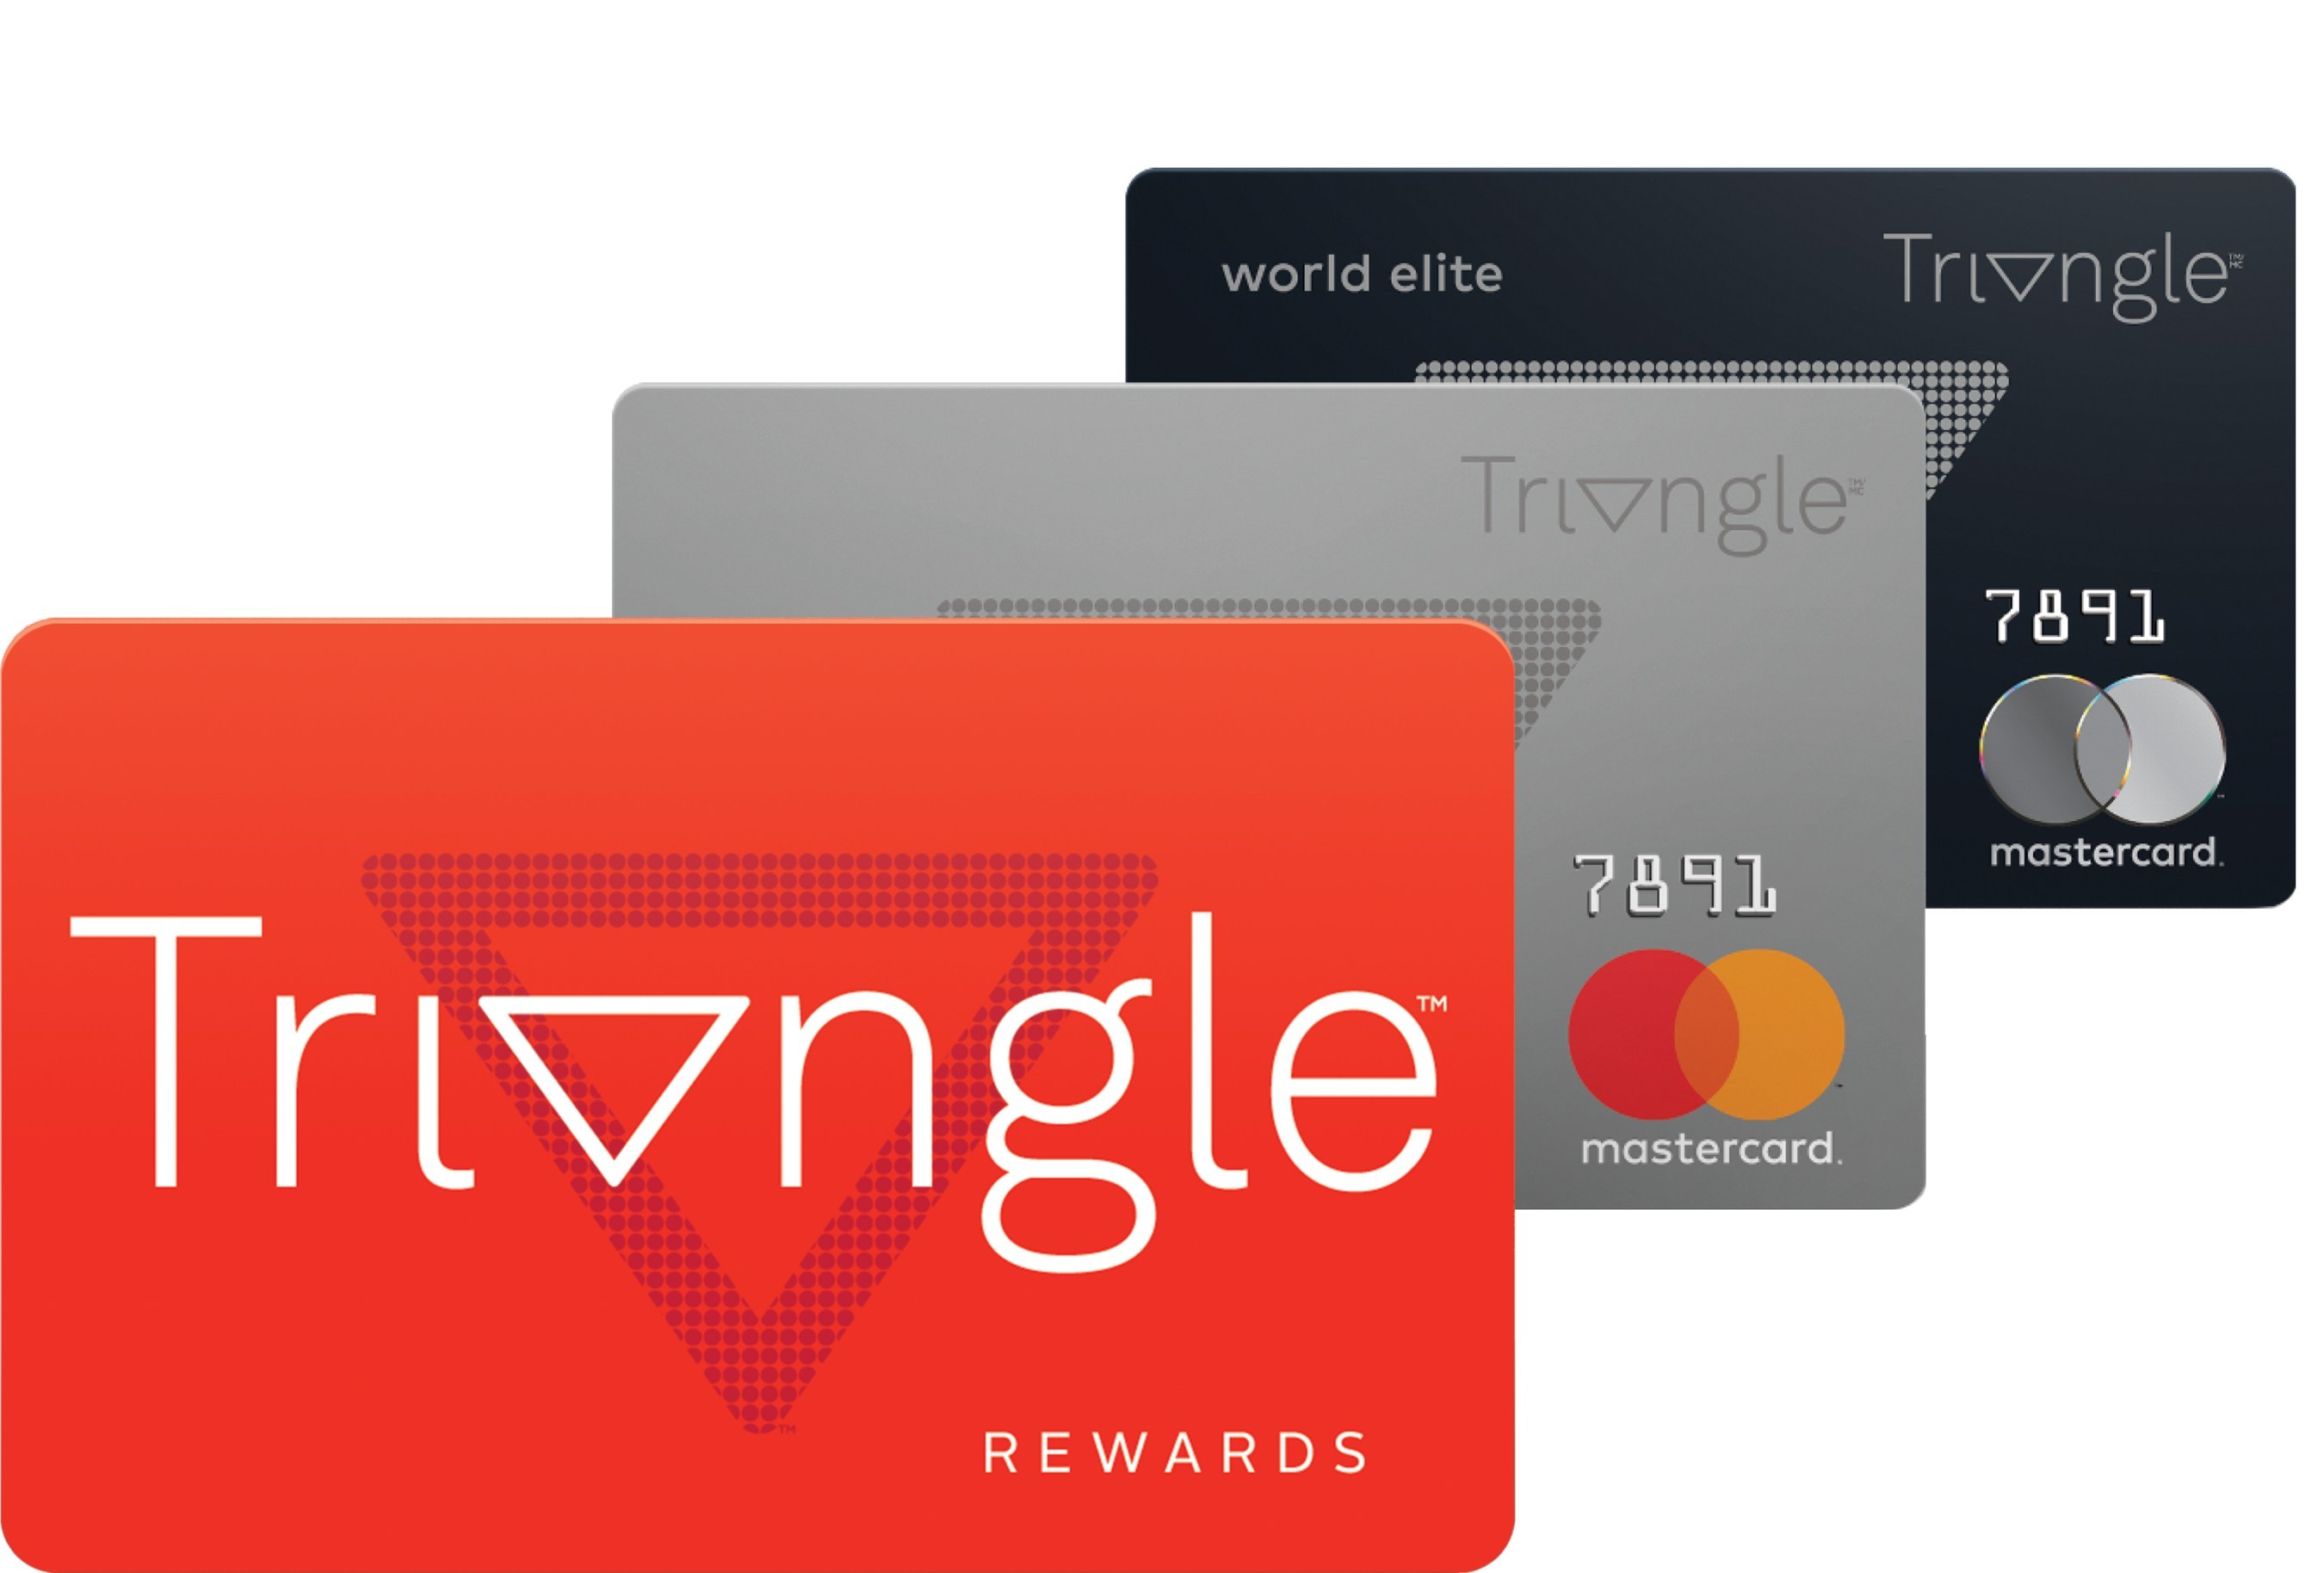 Find Out How to Apply for a Triangle Credit Card - Triangle MasterCard